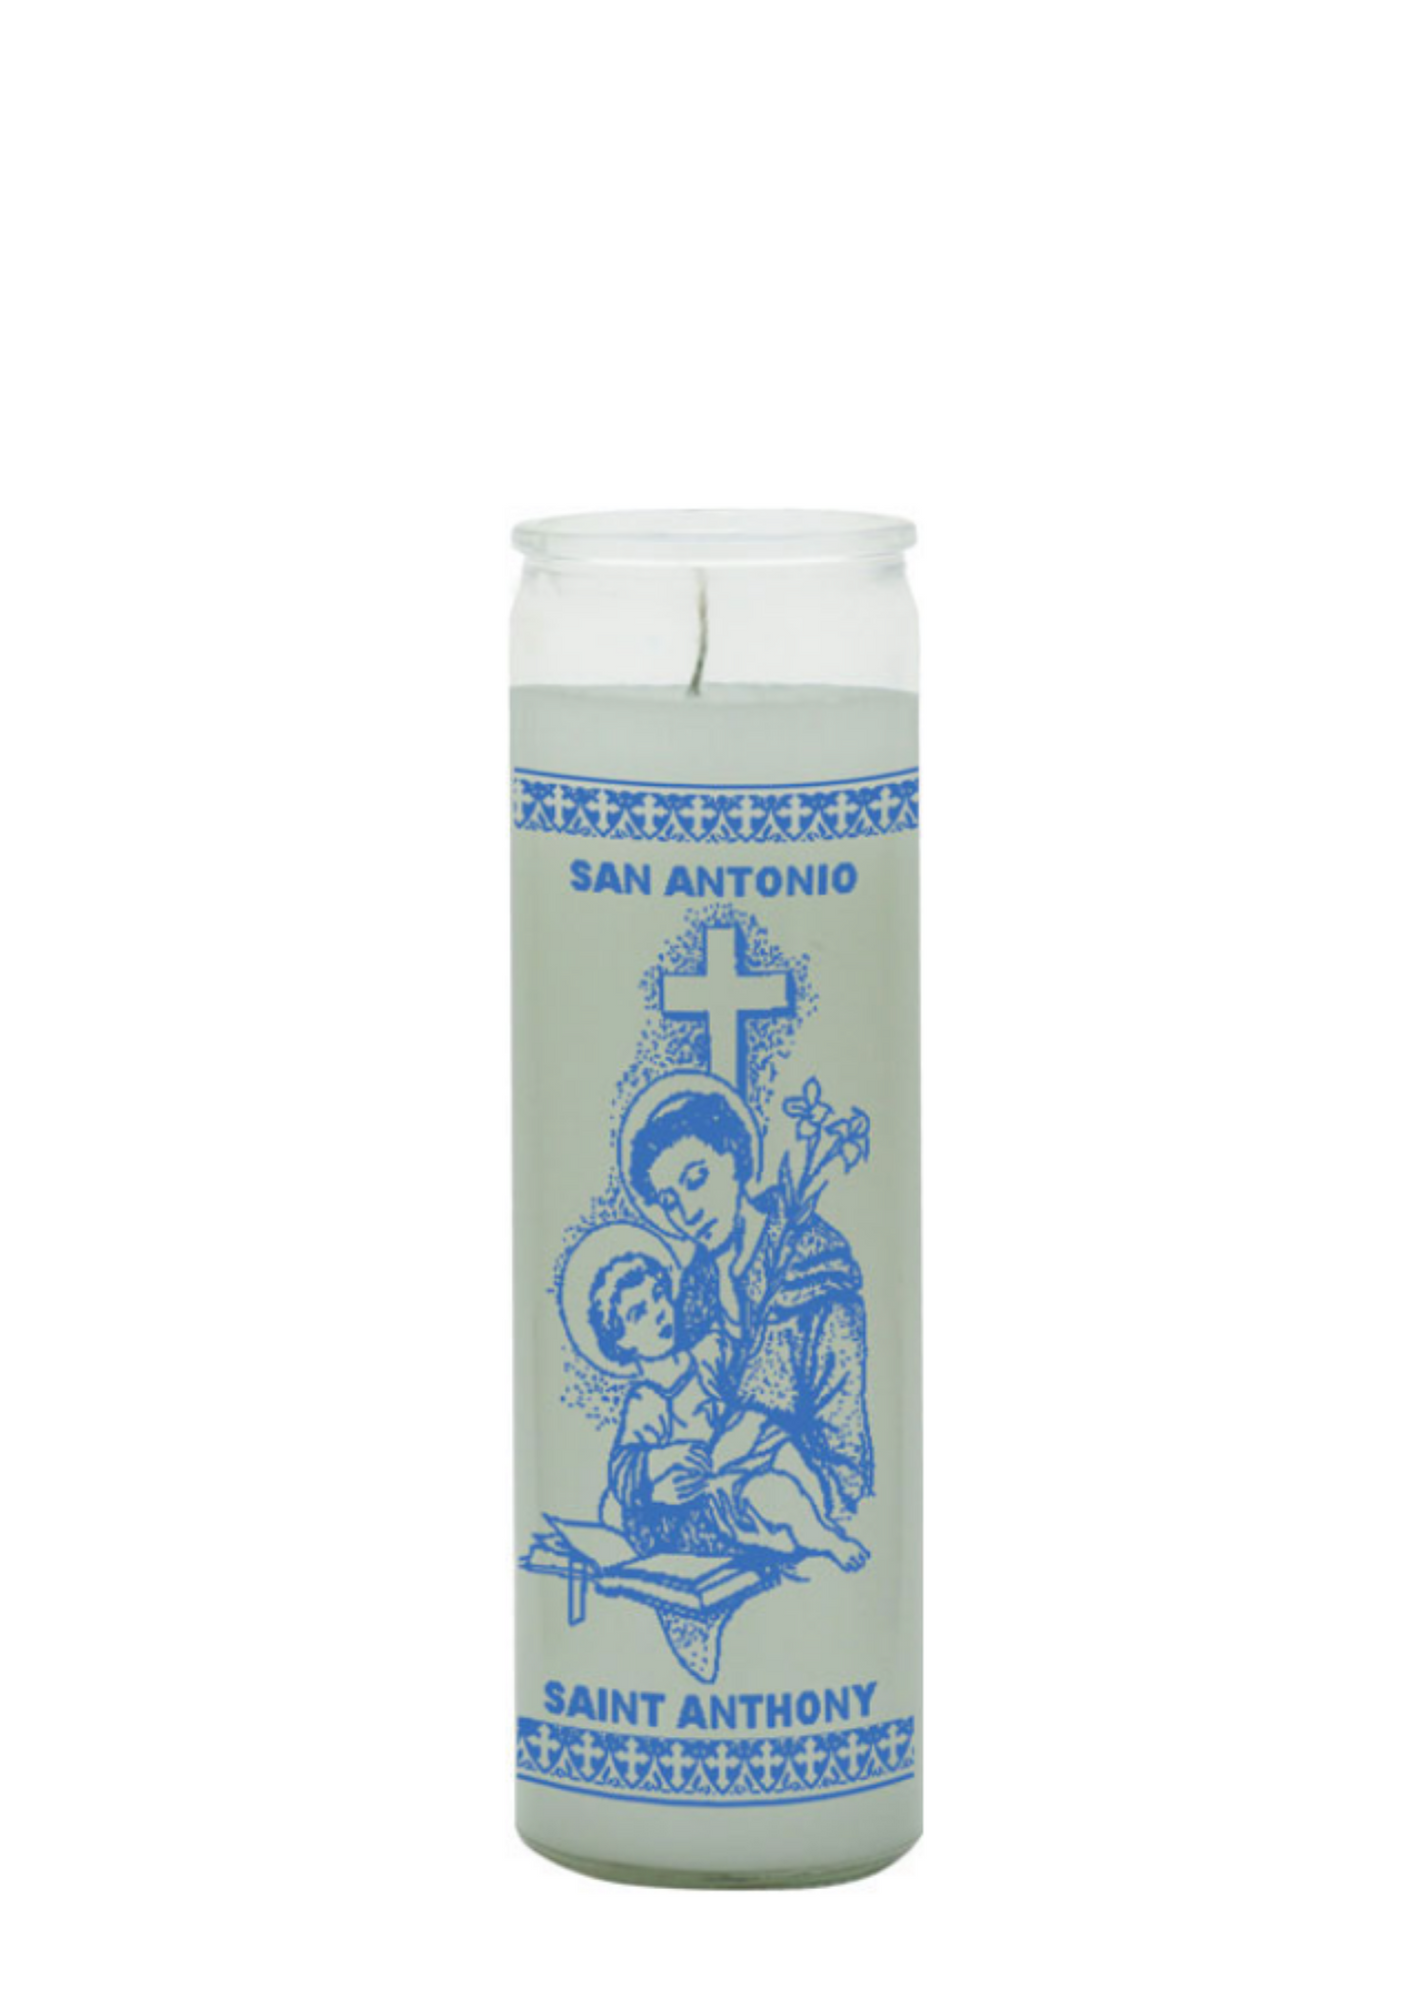 SAINT ANTHONY (White) 1 COLOR 7 DAY CANDLE